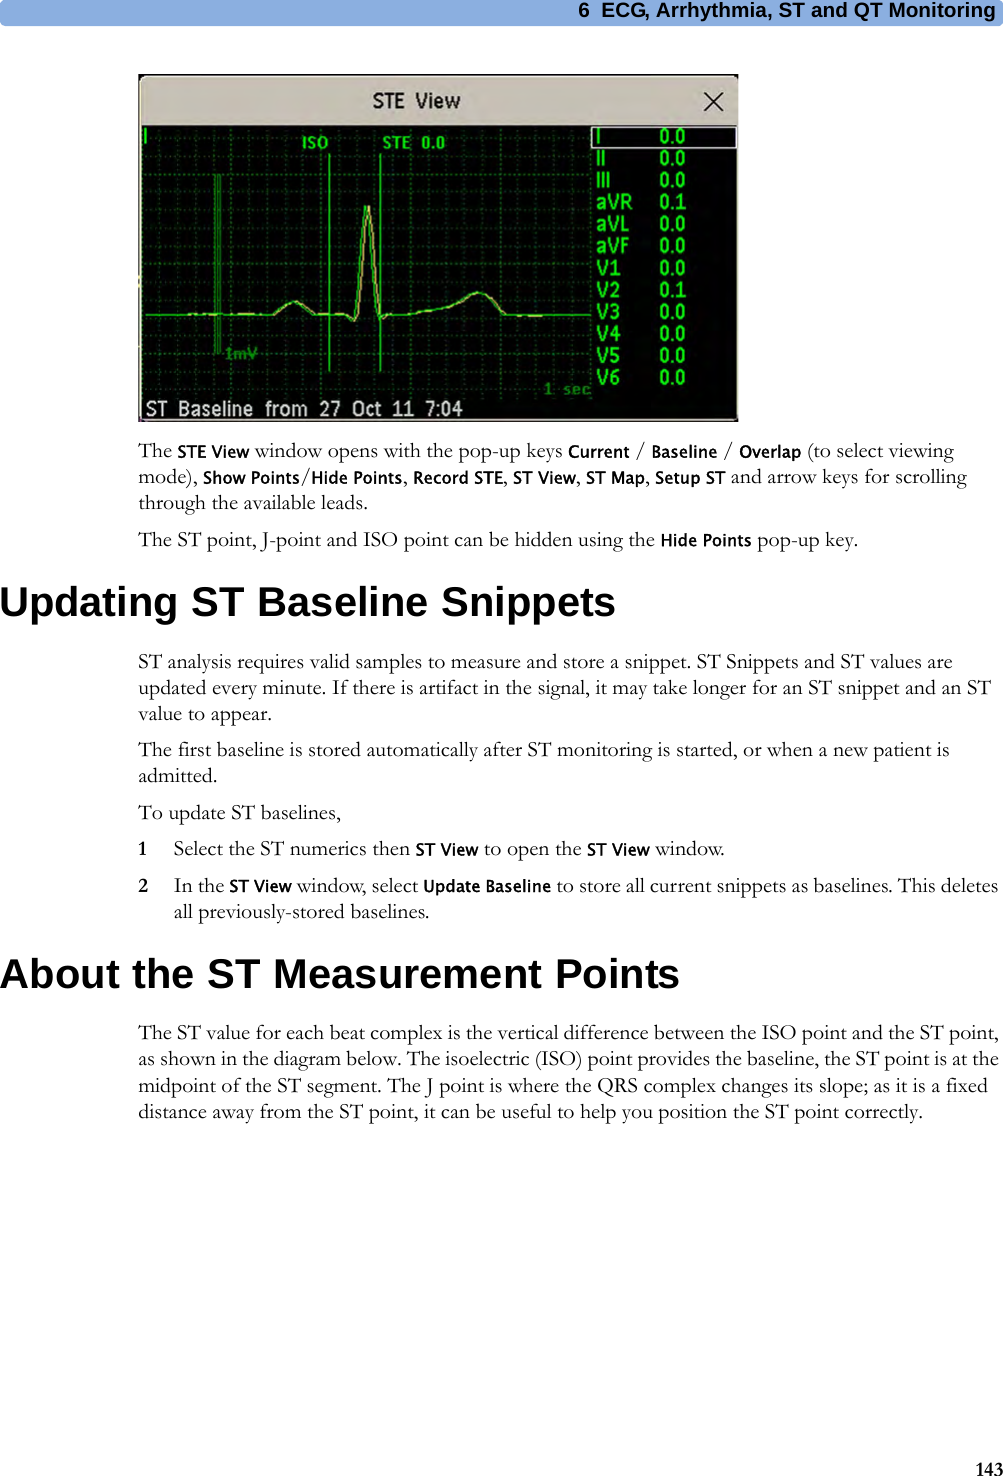 6 ECG, Arrhythmia, ST and QT Monitoring143The STE View window opens with the pop-up keys Current / Baseline / Overlap (to select viewing mode), Show Points/Hide Points, Record STE, ST View, ST Map, Setup ST and arrow keys for scrolling through the available leads.The ST point, J-point and ISO point can be hidden using the Hide Points pop-up key.Updating ST Baseline SnippetsST analysis requires valid samples to measure and store a snippet. ST Snippets and ST values are updated every minute. If there is artifact in the signal, it may take longer for an ST snippet and an ST value to appear.The first baseline is stored automatically after ST monitoring is started, or when a new patient is admitted.To update ST baselines,1Select the ST numerics then ST View to open the ST View window.2In the ST View window, select Update Baseline to store all current snippets as baselines. This deletes all previously-stored baselines.About the ST Measurement PointsThe ST value for each beat complex is the vertical difference between the ISO point and the ST point, as shown in the diagram below. The isoelectric (ISO) point provides the baseline, the ST point is at the midpoint of the ST segment. The J point is where the QRS complex changes its slope; as it is a fixed distance away from the ST point, it can be useful to help you position the ST point correctly.